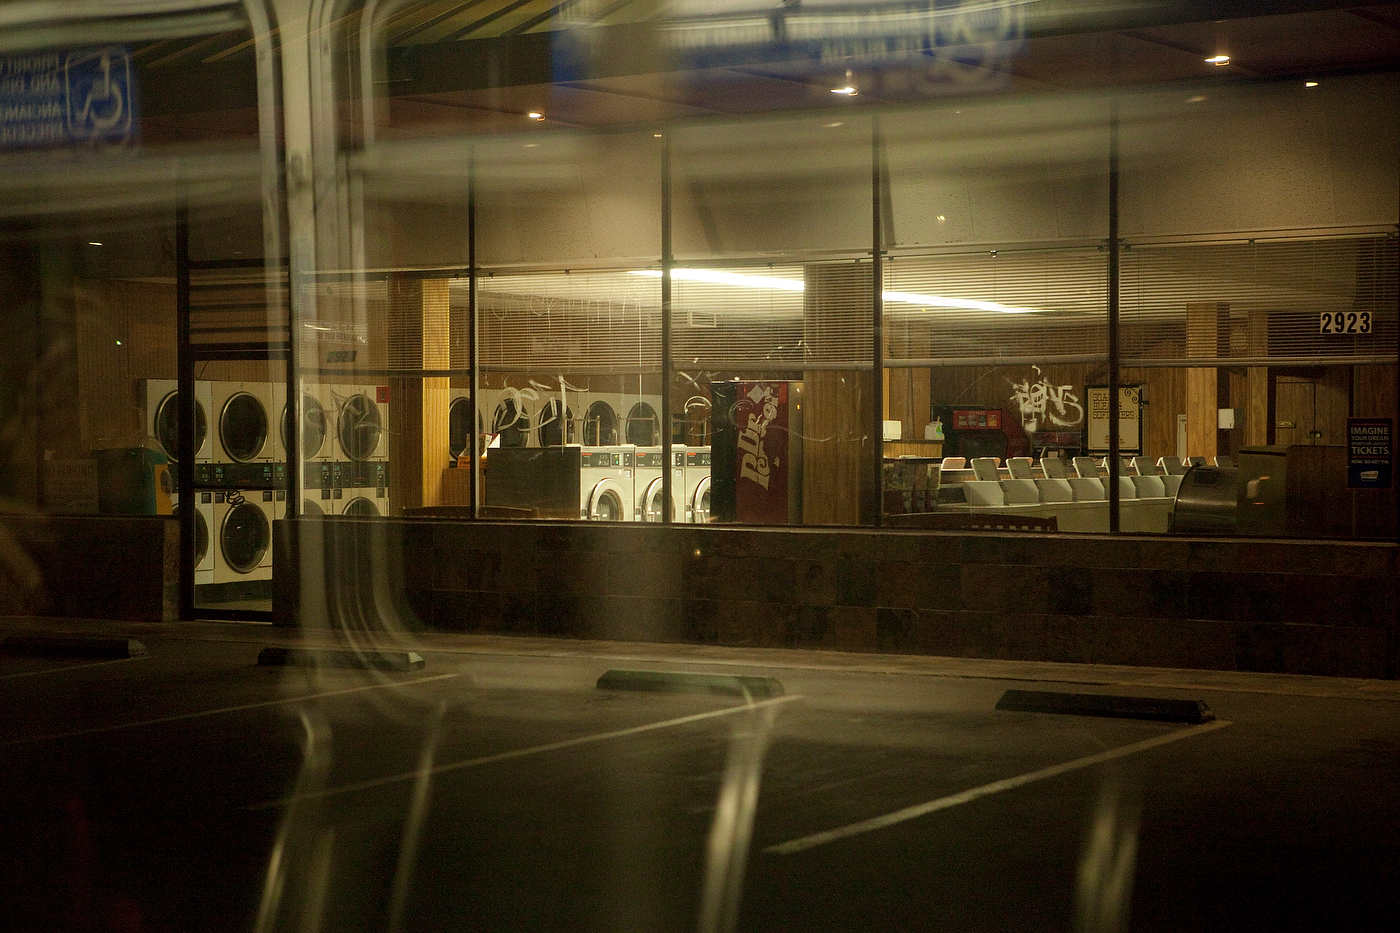 Laundromat, through the window of a Line 4 bus on Sunset Boulevard.